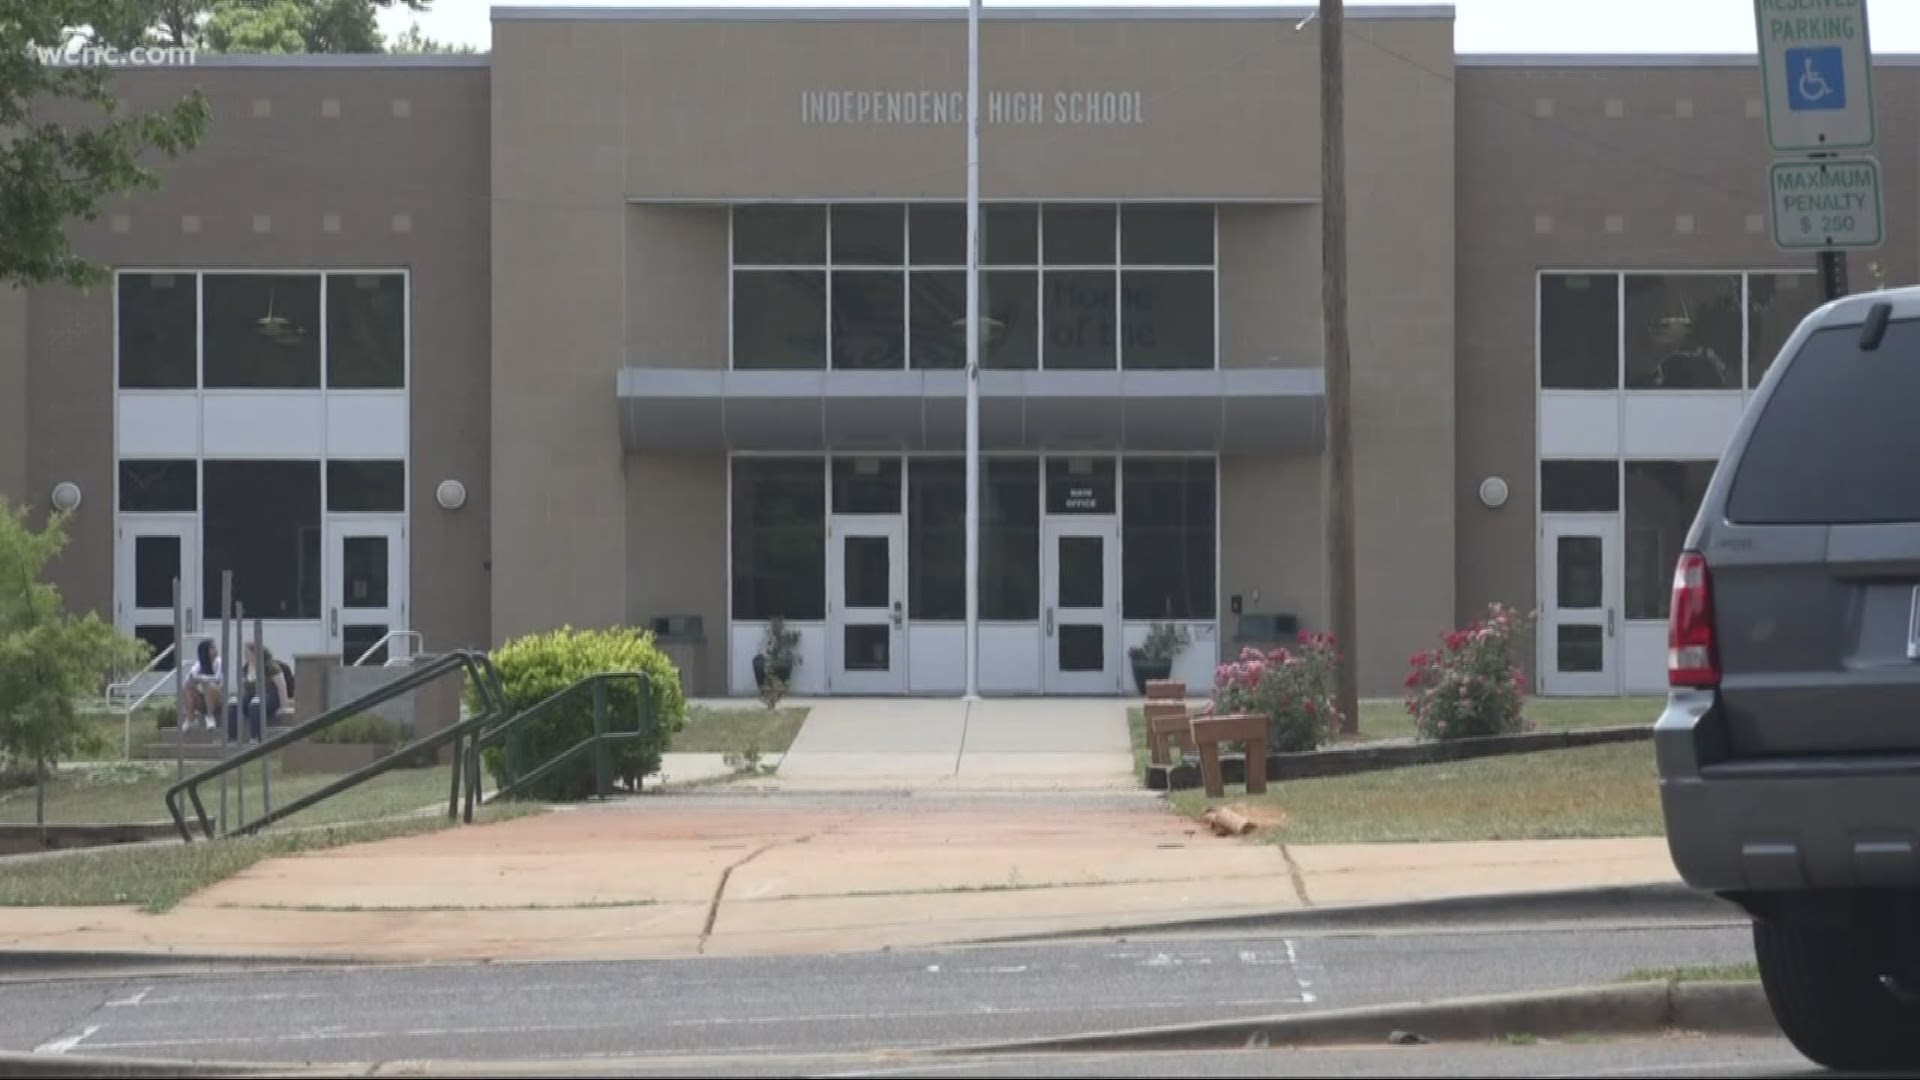 Police and administrators say they fully investigated the threat and the school day continued as planned, but it did cause concern for students and parents.